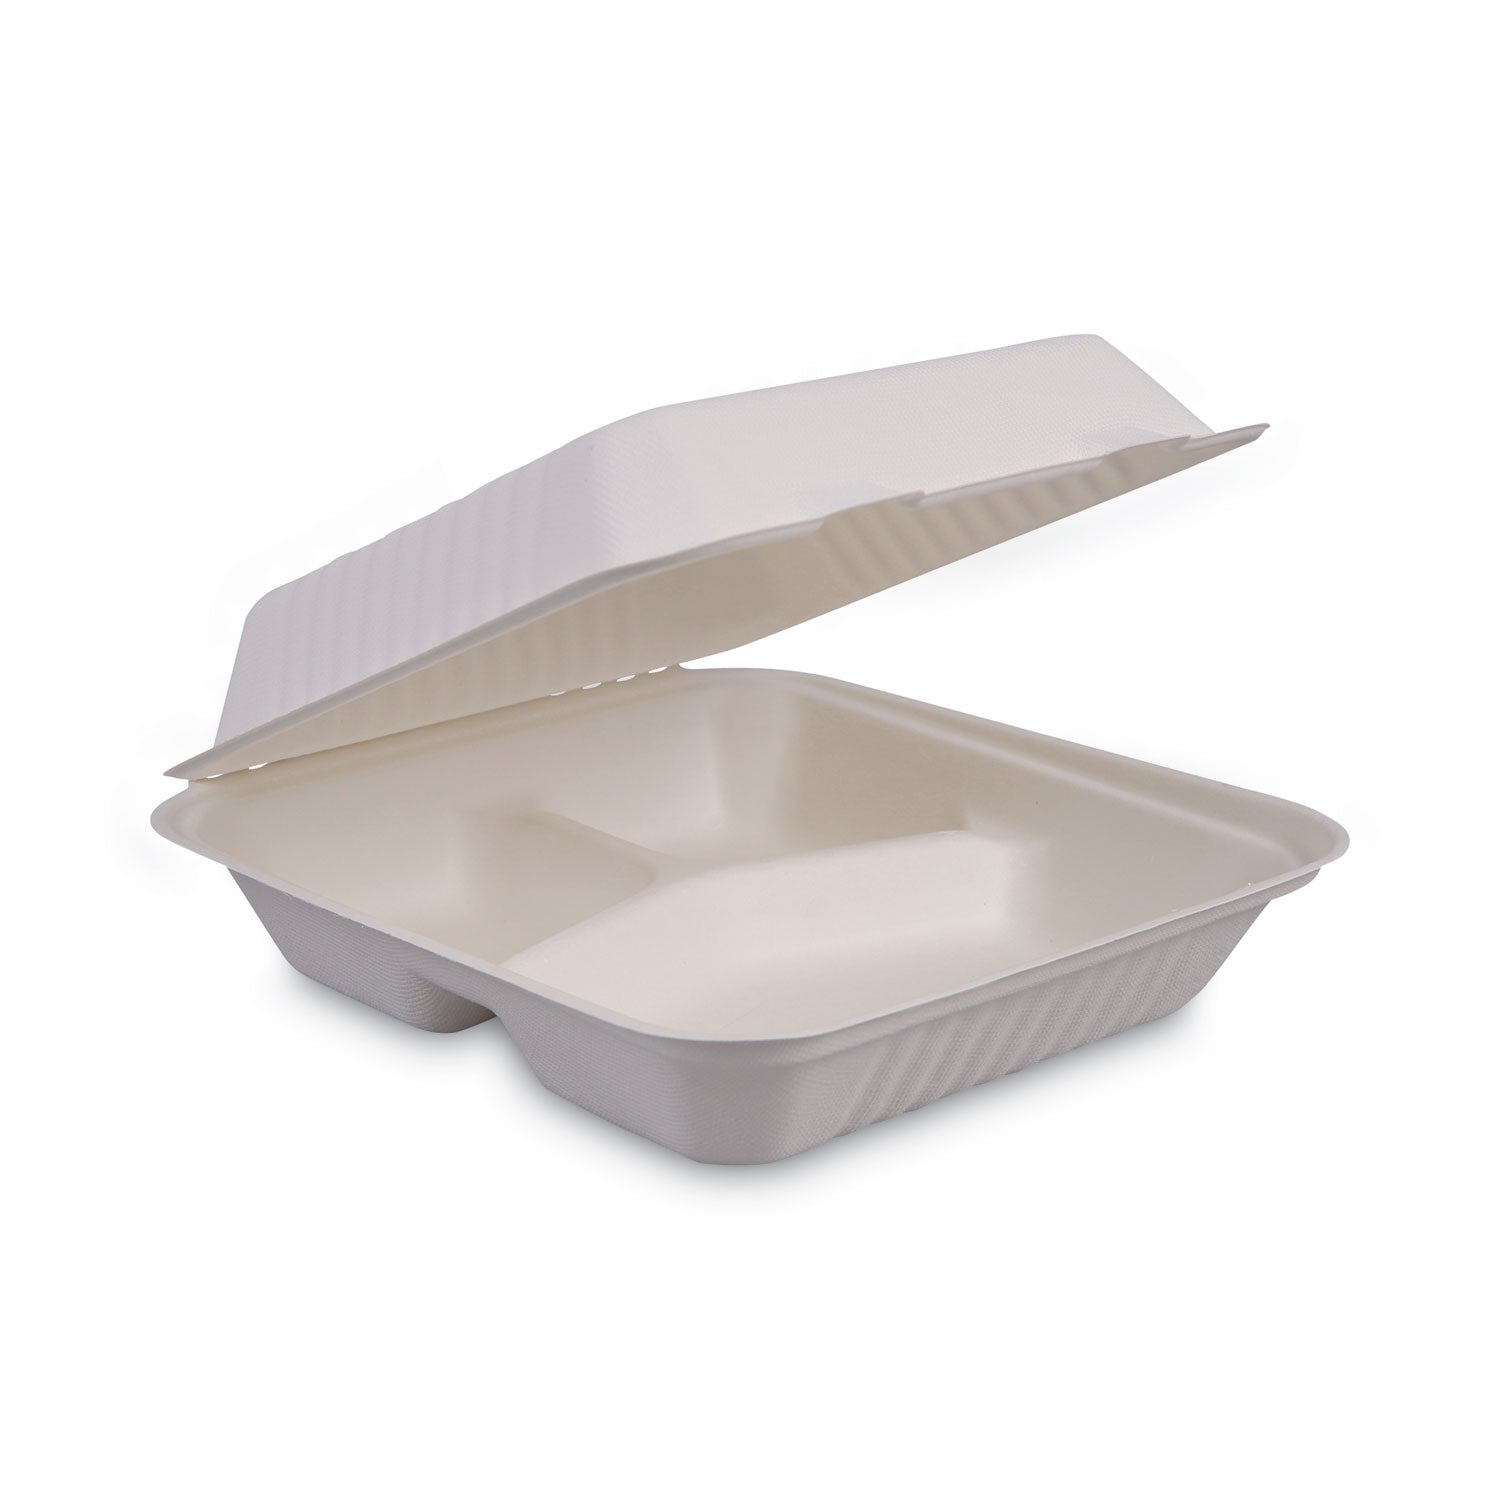 bagasse-food-containers-hinged-lid-3-compartment-9-x-9-x-319-white-sugarcane-100-sleeve-2-sleeves-carton_bwkhingewf3cm9 - 1